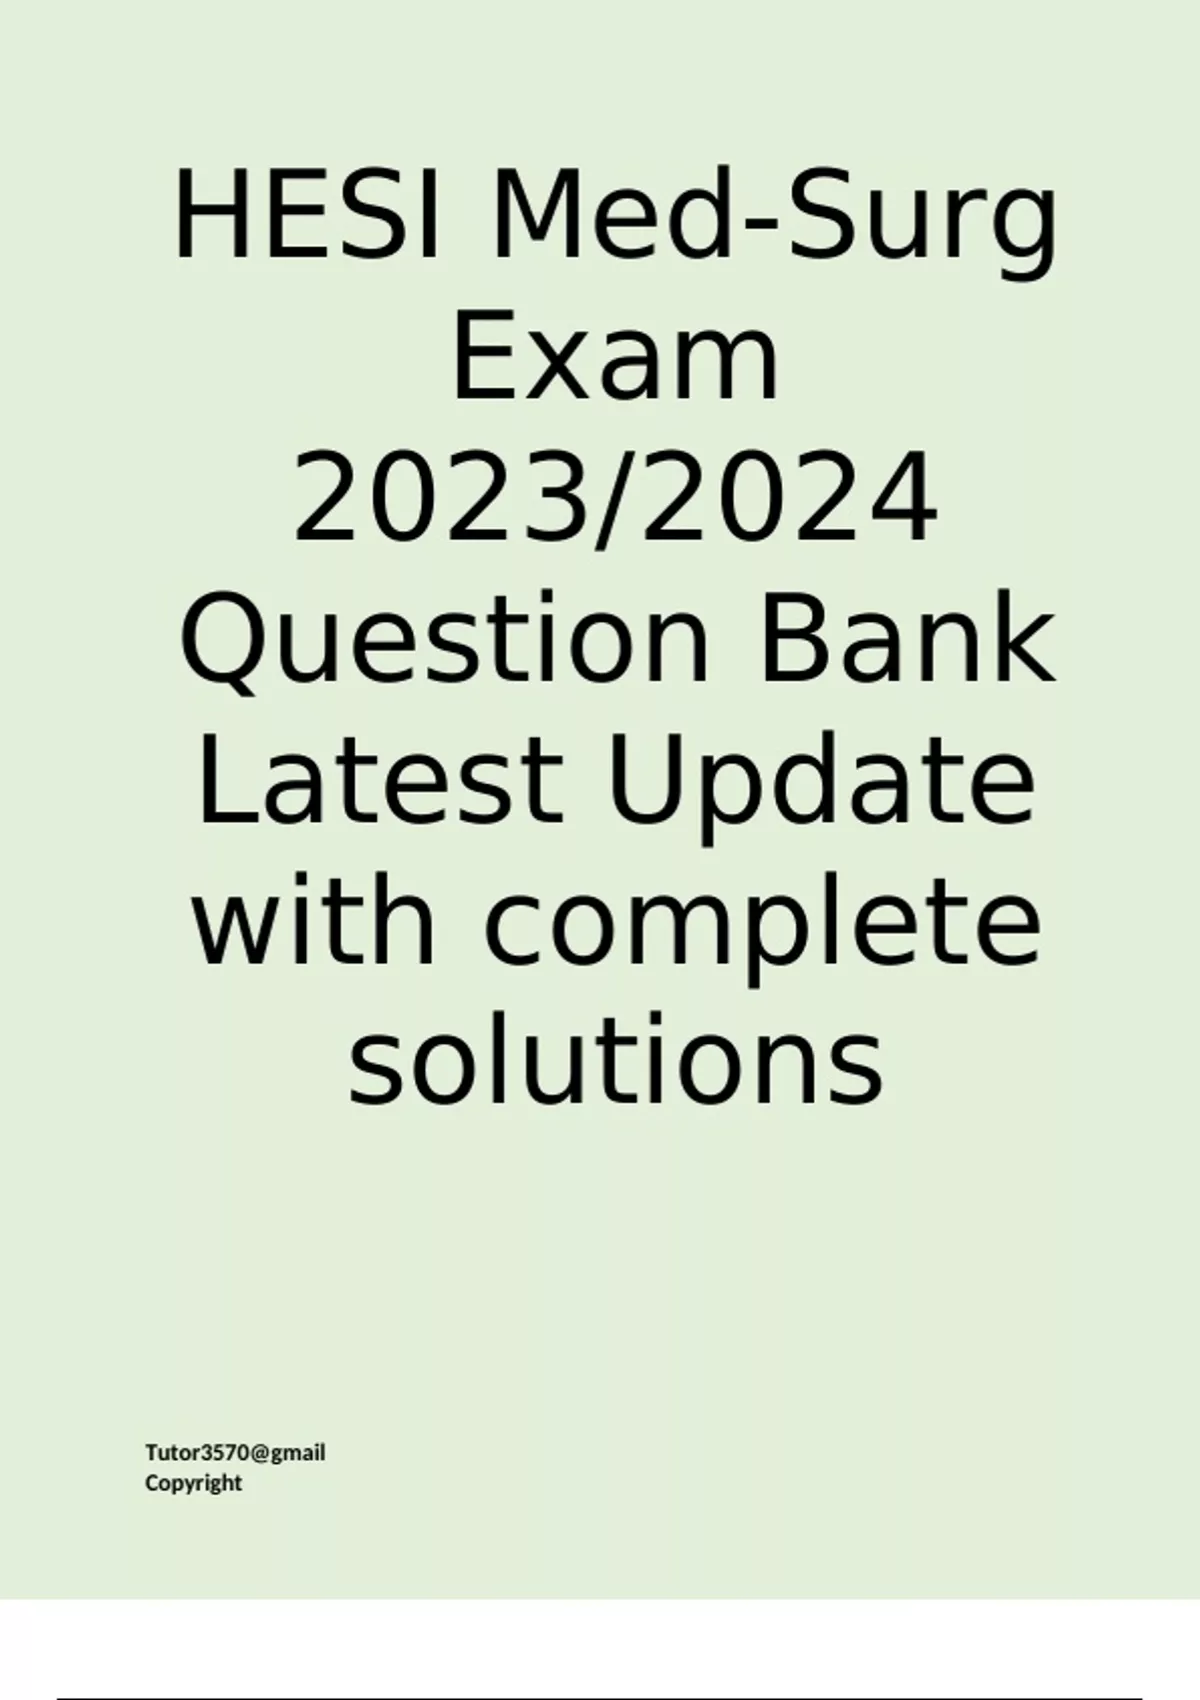 HESI MedSurg Exam 2023/2024 Question Bank Latest Update with complete